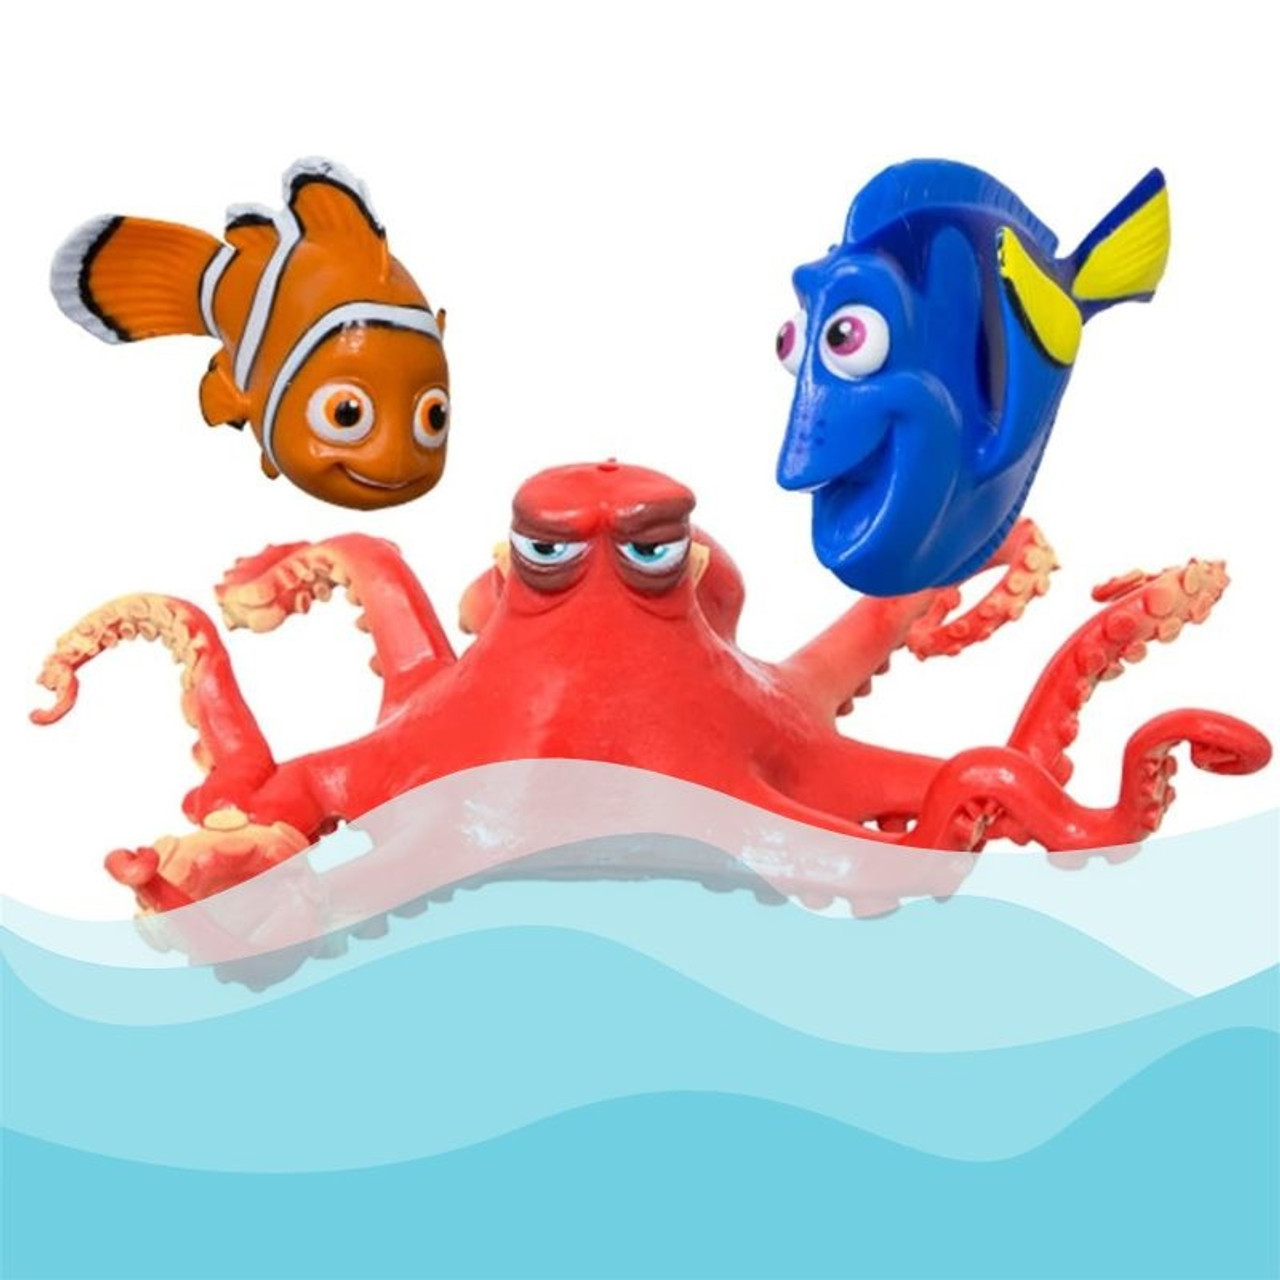 https://cdn11.bigcommerce.com/s-c9a80/images/stencil/1280x1280/products/13392/46554/SwimWays_Dive_Characters_Finding_Nemo__30712.1655344521.jpg?c=2